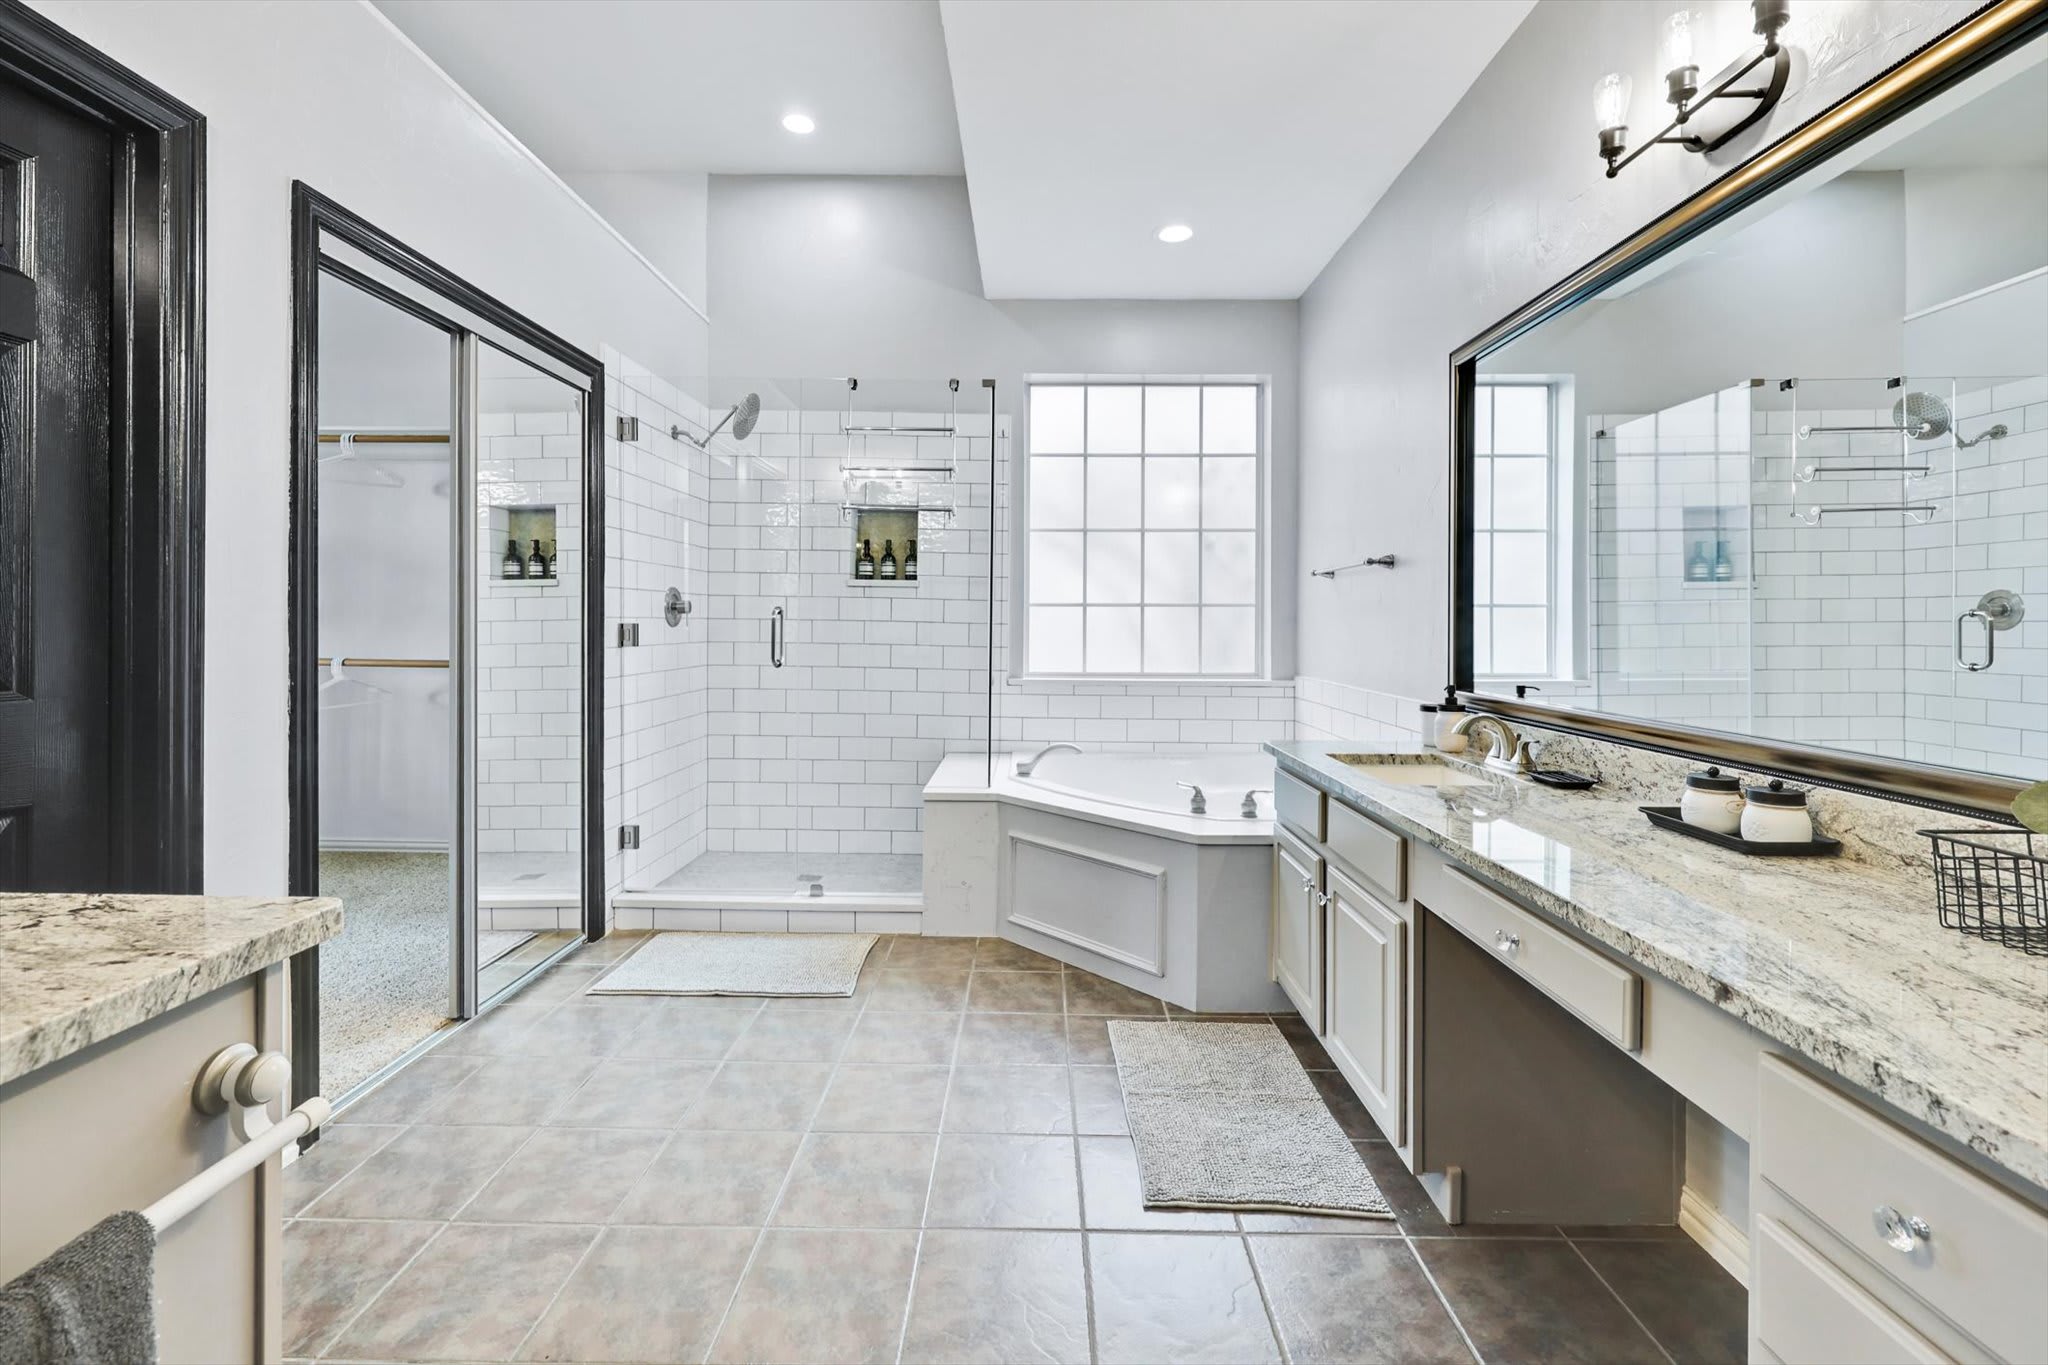 This bathroom was designed to give you a spa-like feel with its luxurious jetted tub, glass walk-in standing shower, and granite countertops!